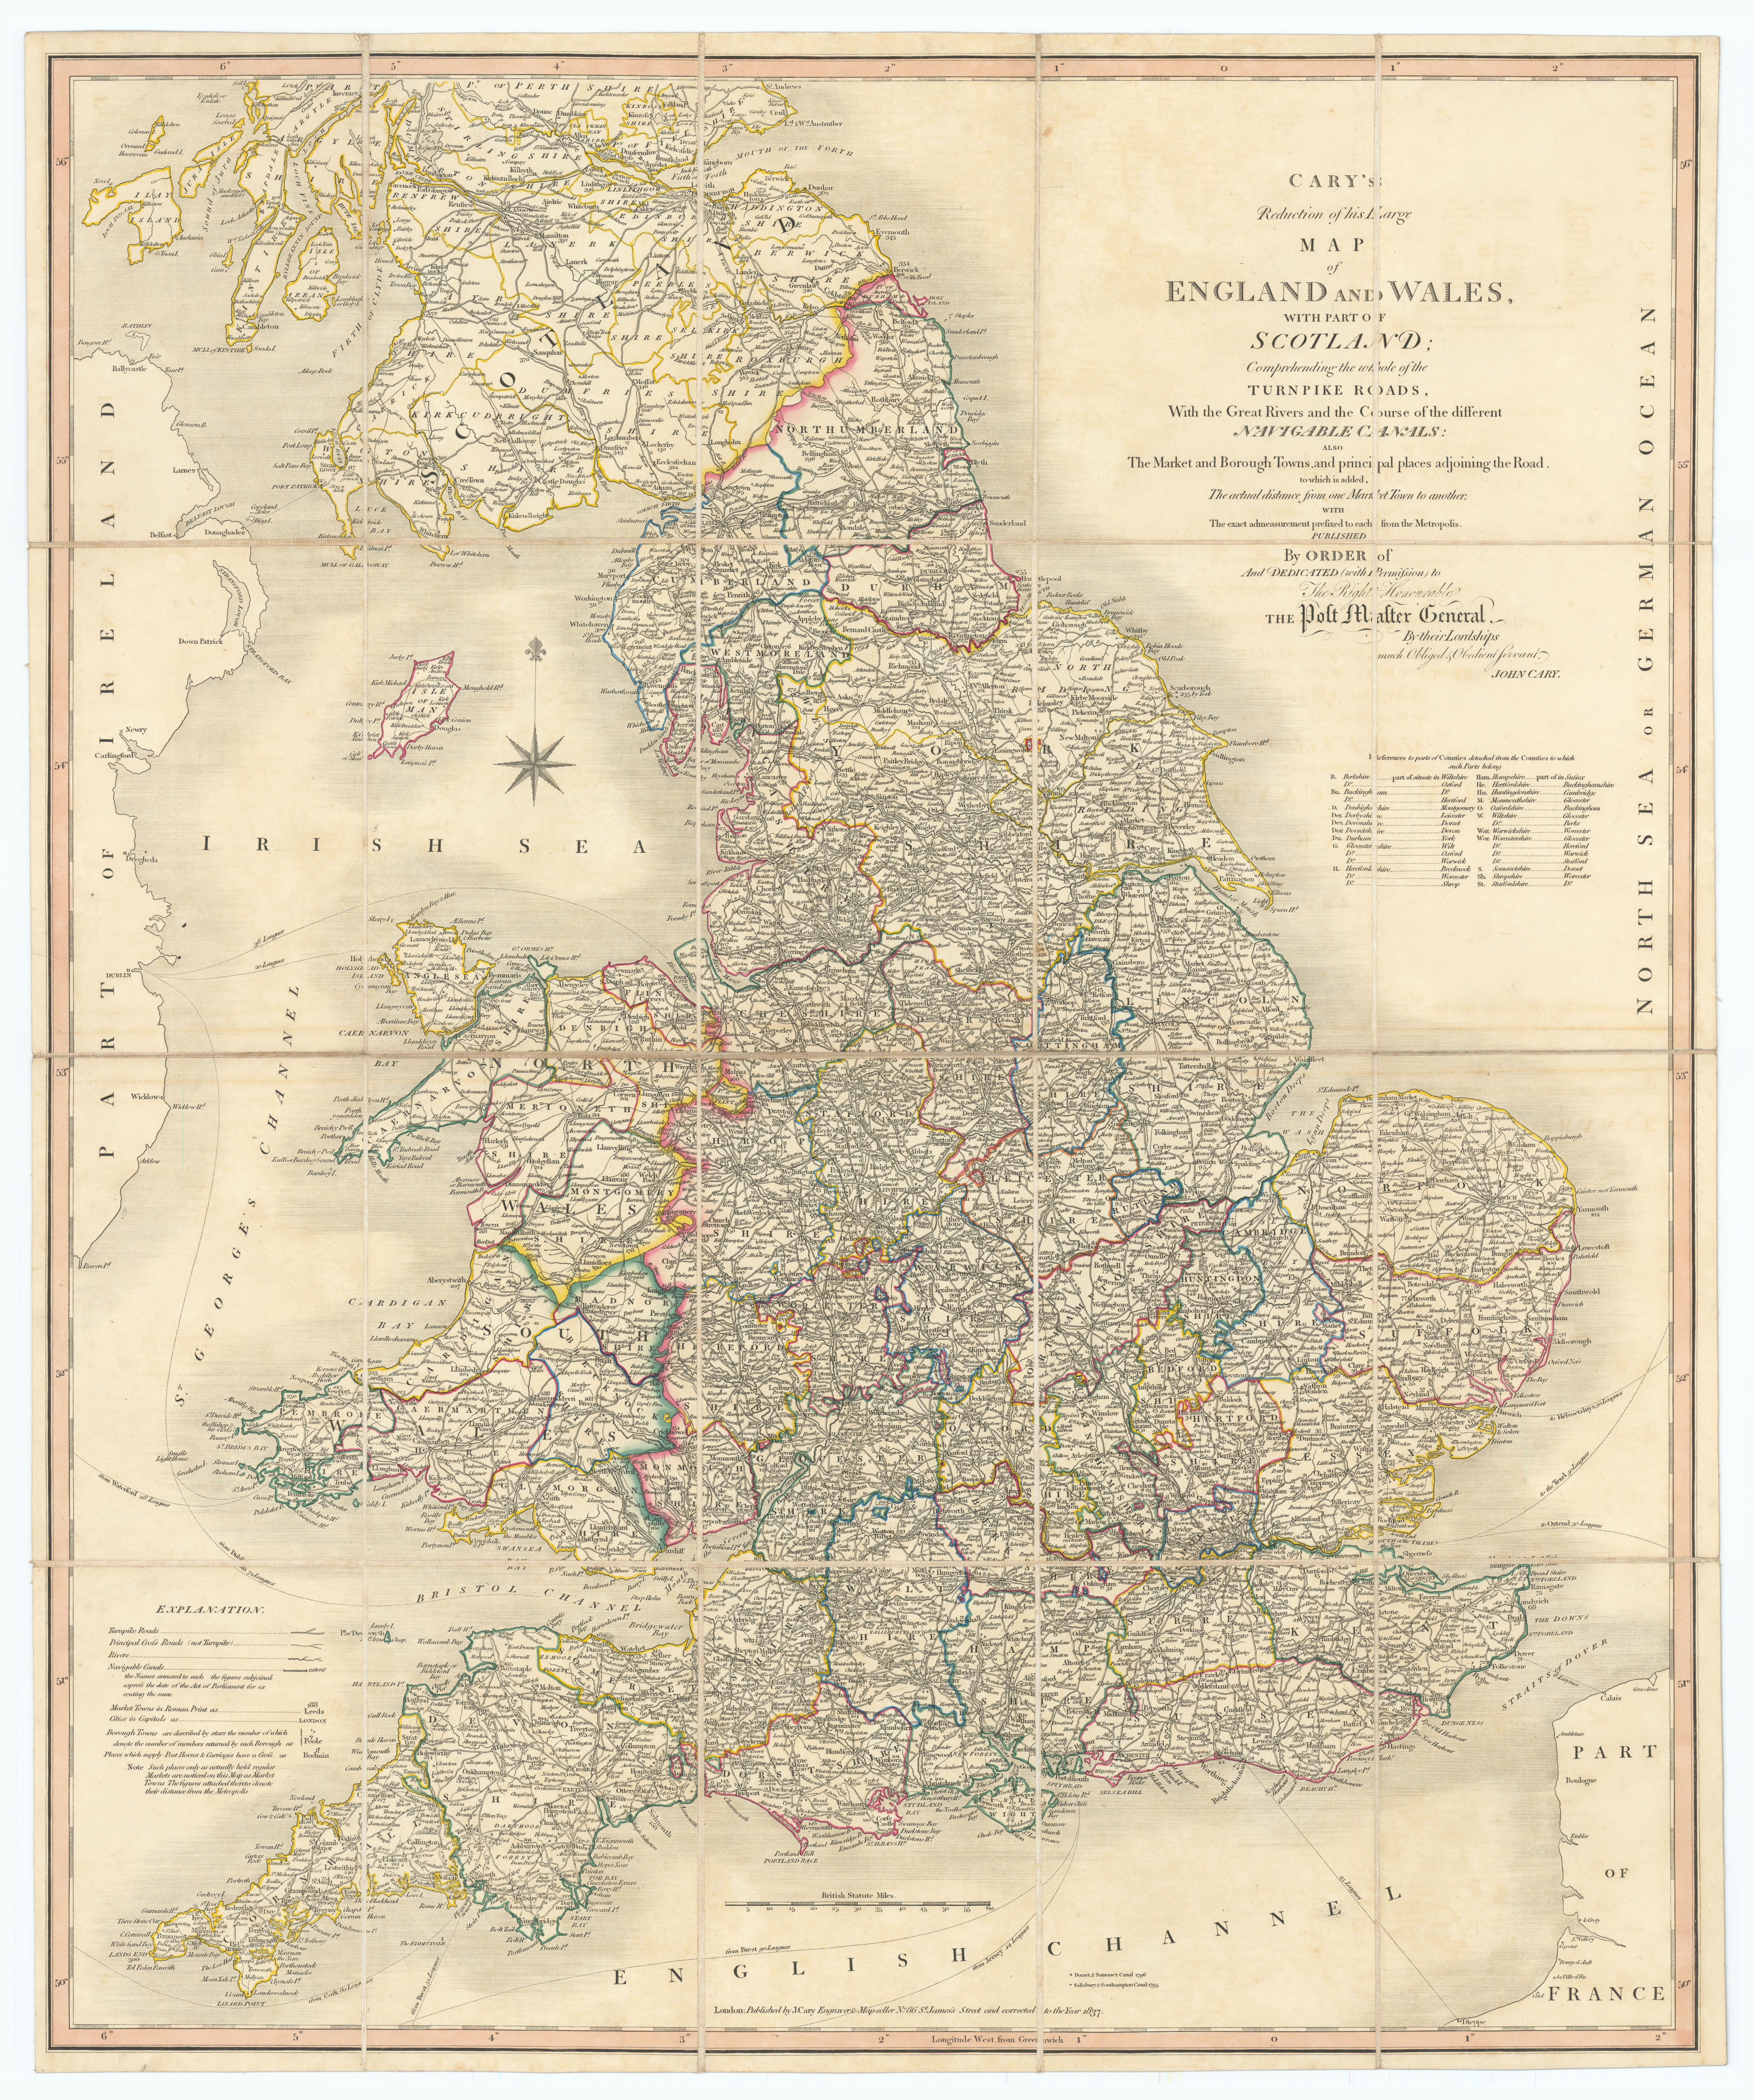 Associate Product 'Cary's reduction of his large map of England & Wales'. Turnpikes canals &c 1837